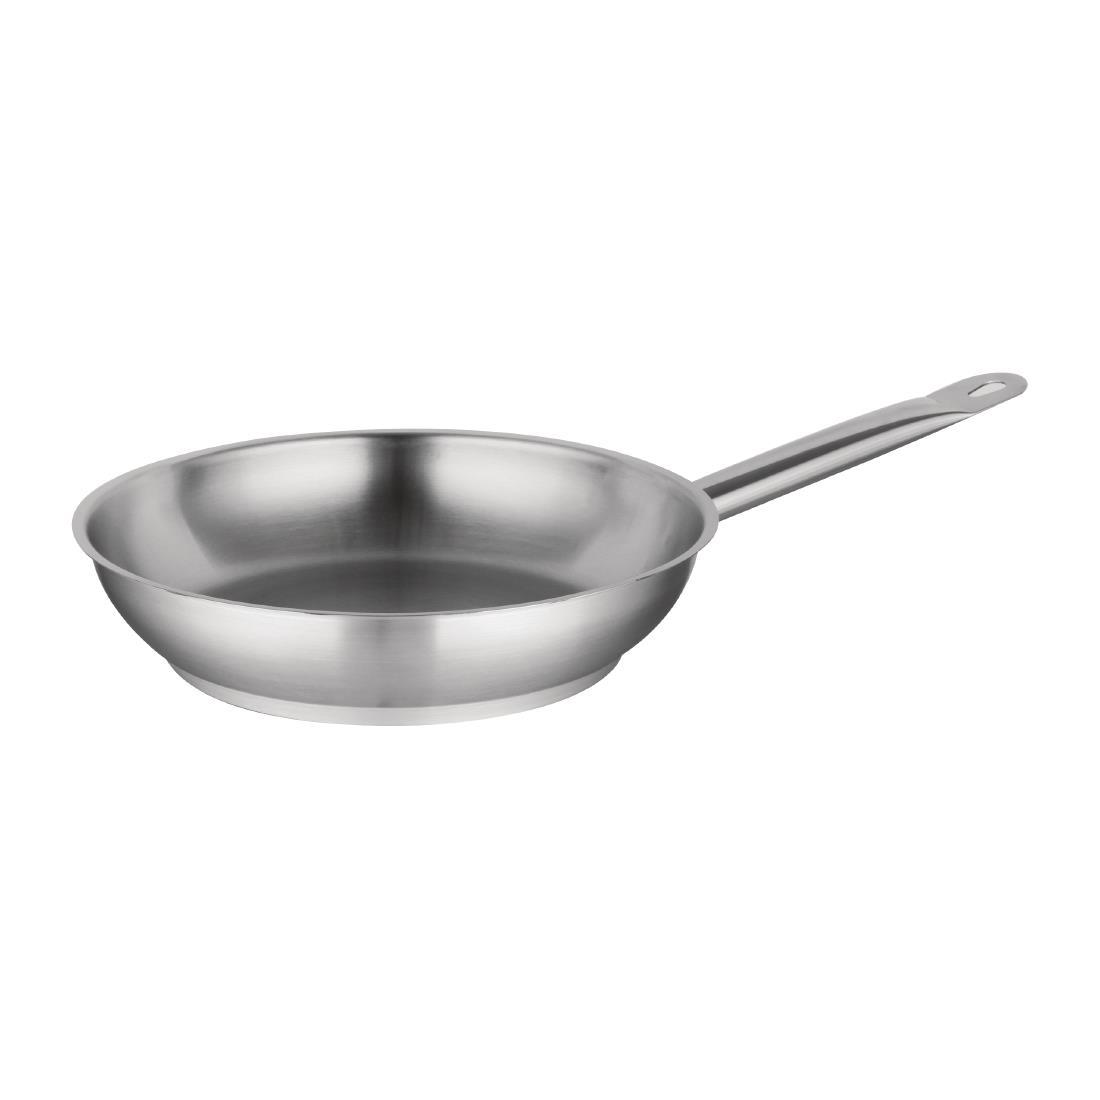 Vogue Stainless Steel Induction Frying Pan 240mm - M925  - 1